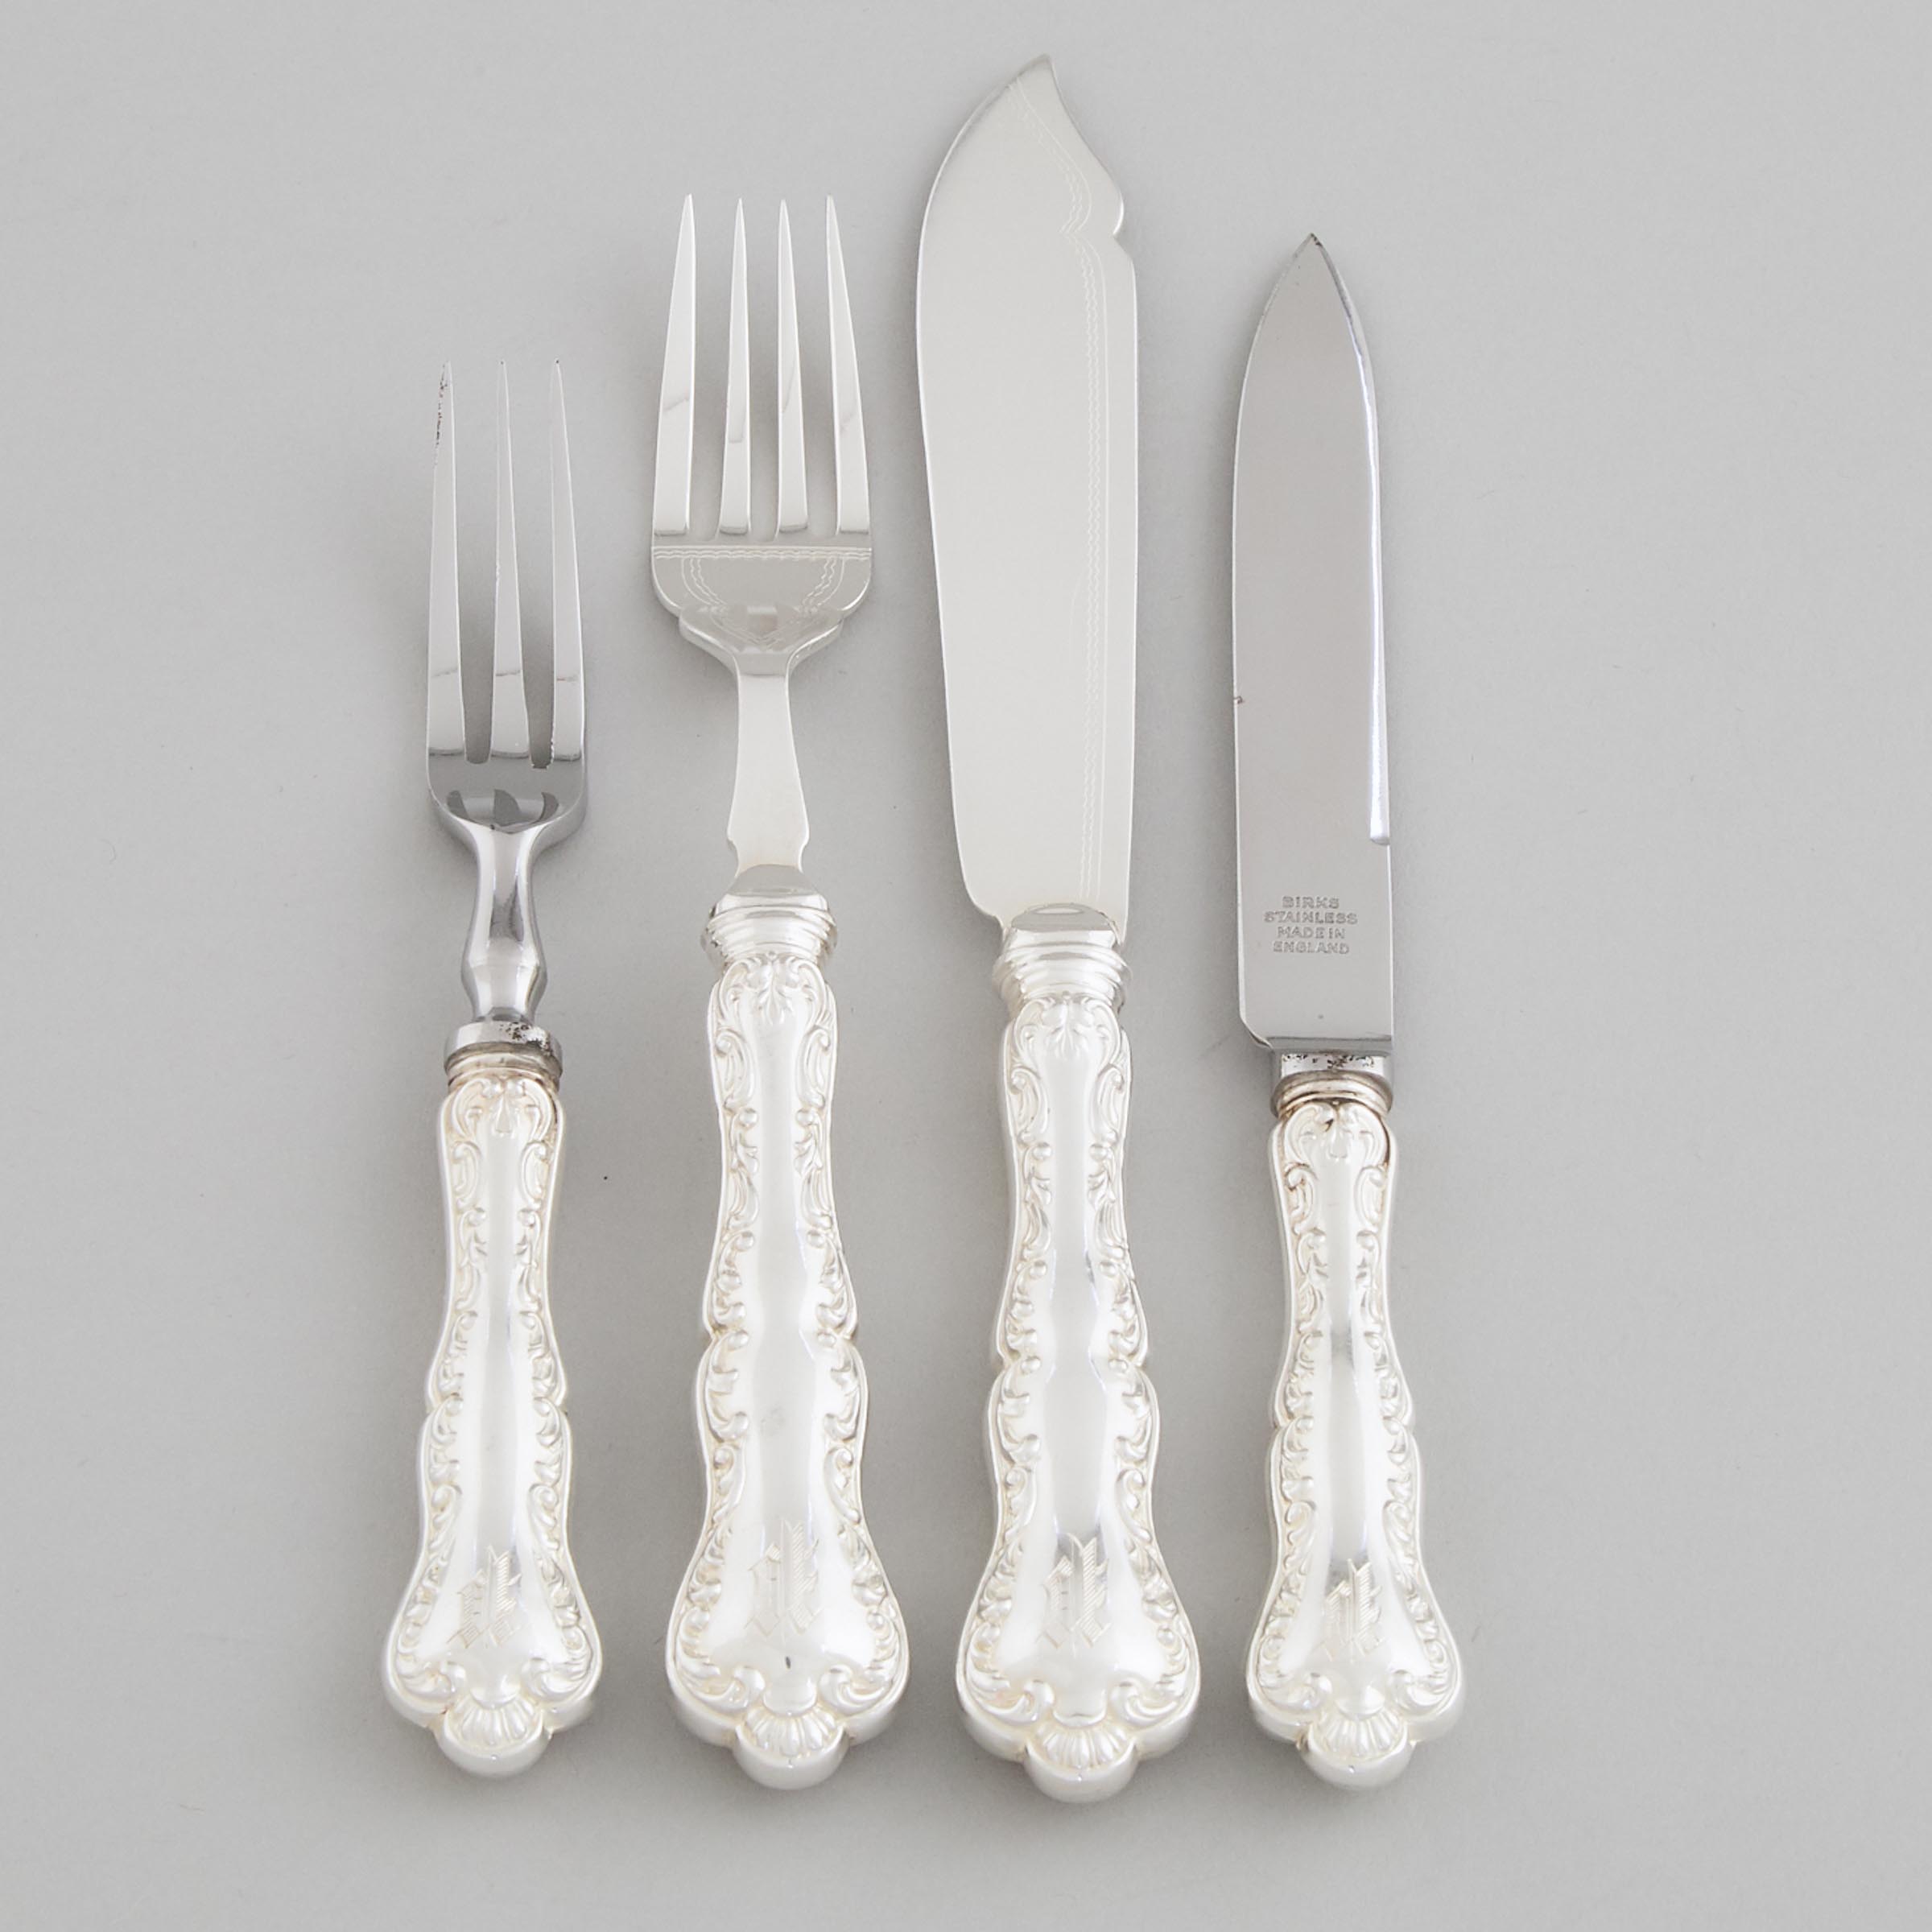 Twelve Canadian Silver 'Louis XV' Pattern Fish Knives and Forks and Twelve Dessert Knives and Forks, Henry Birks & Sons, Montreal, Que., 20th century